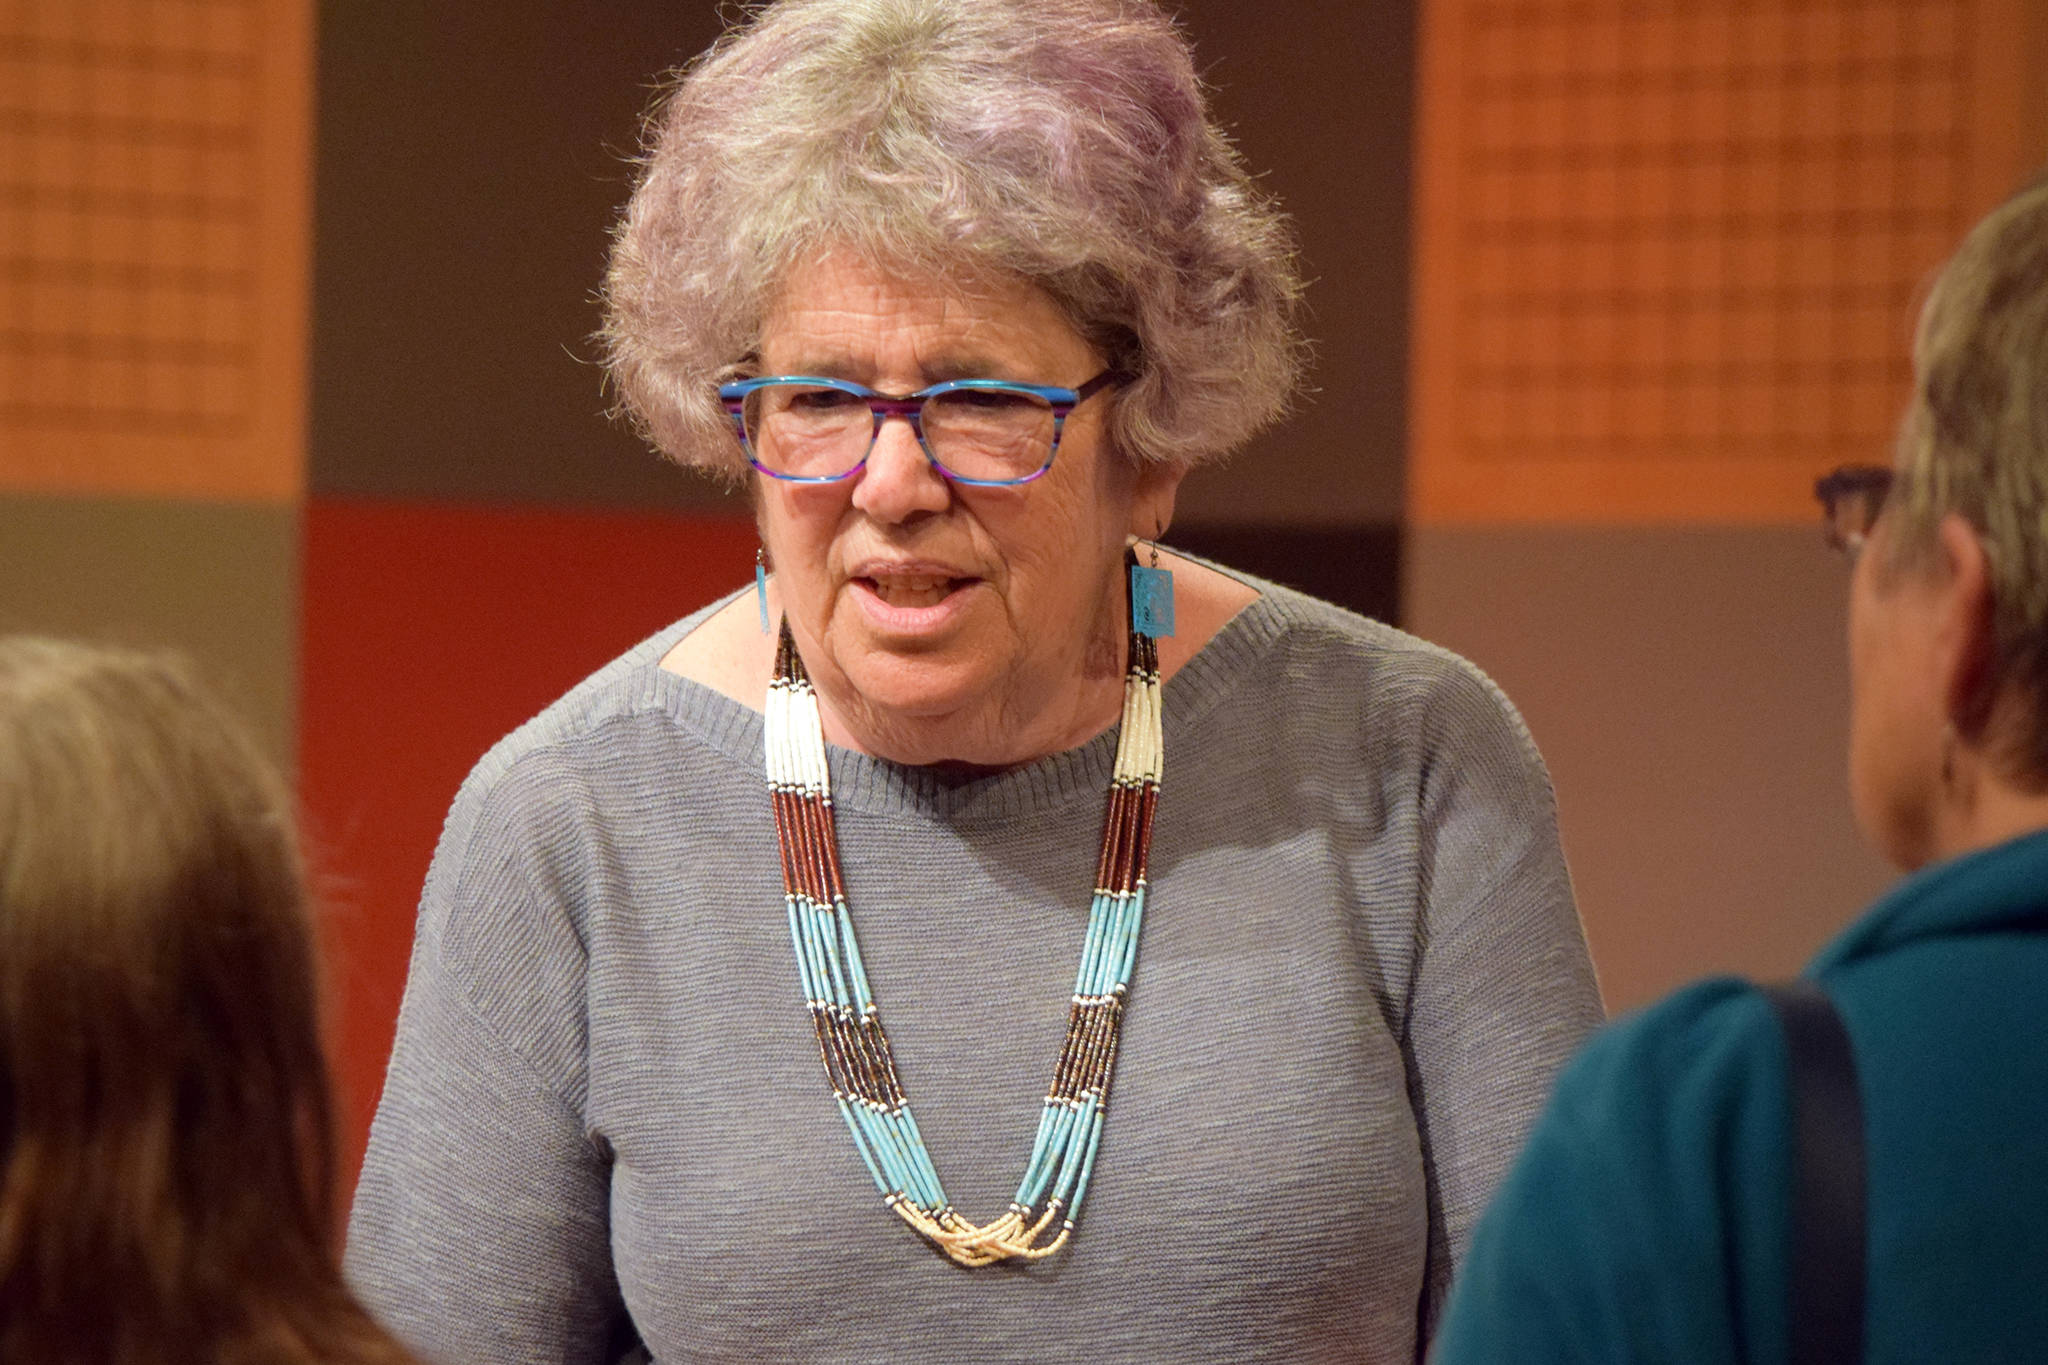 Susan Fitzgerald speaks about her volunteer work at a refugee shelter in New Mexico during a presentation in Juneau on Friday, May 31, 2019. (Ben Hohenstatt | Juneau Empire)